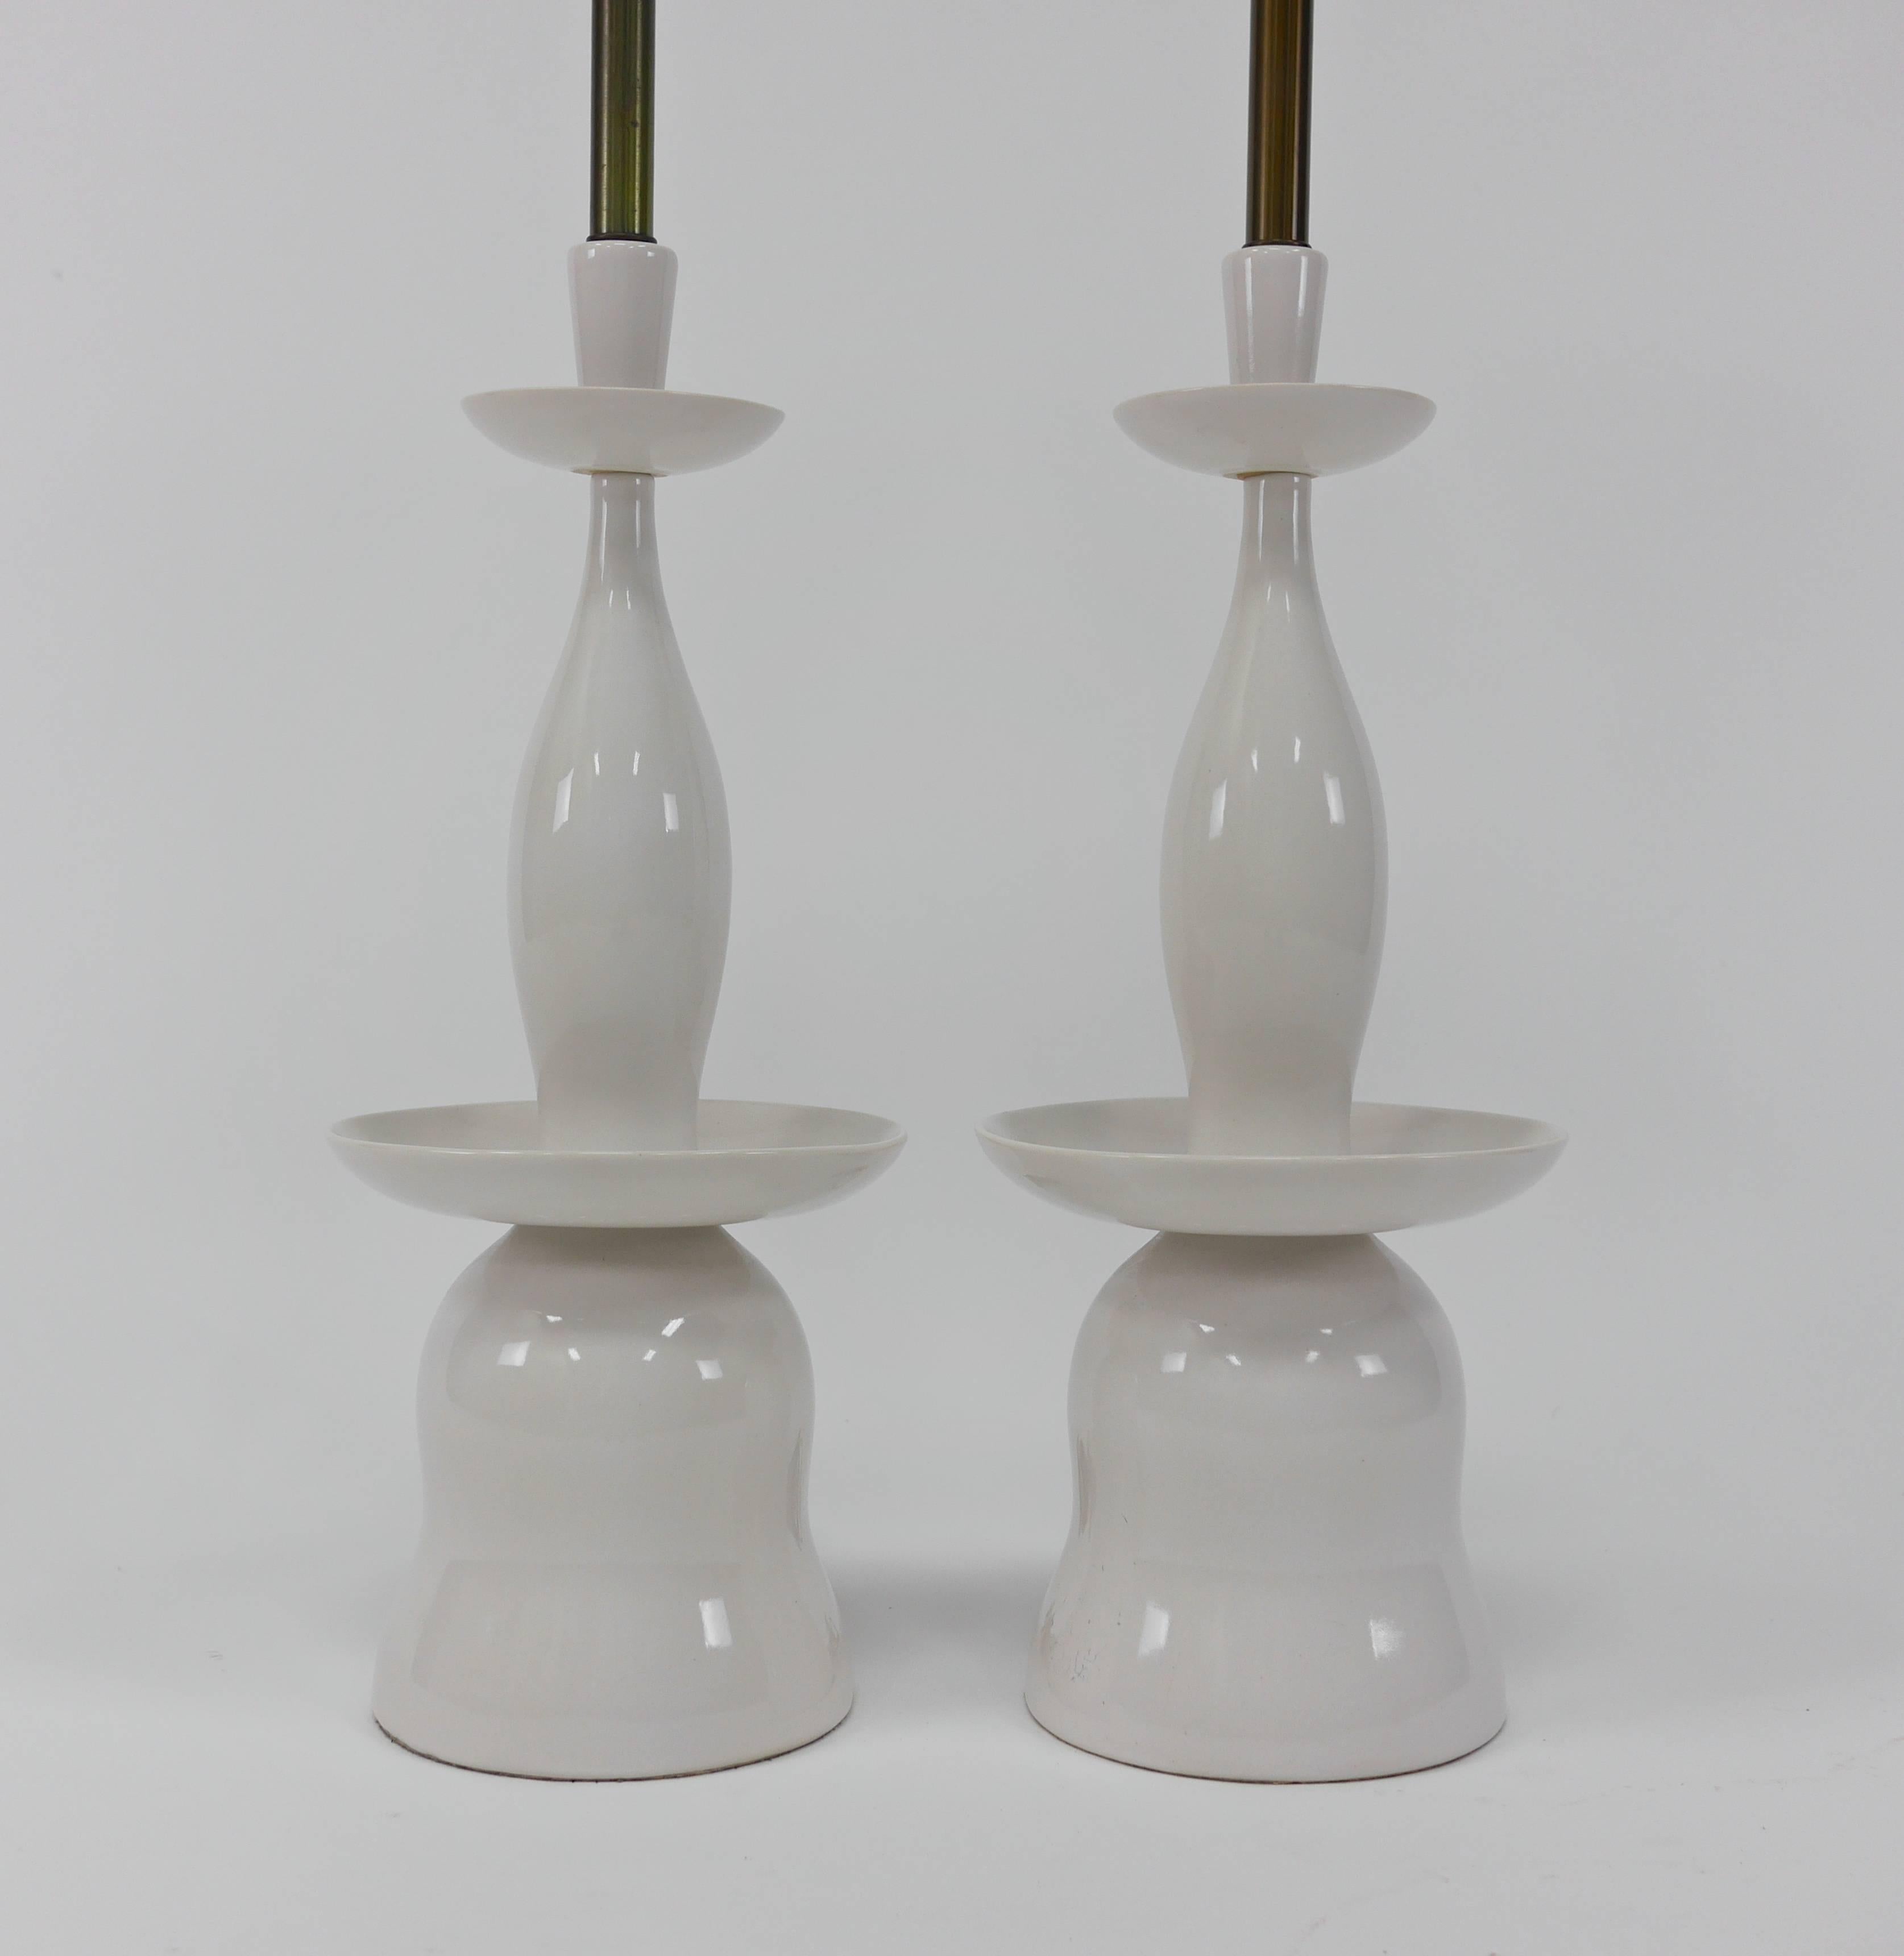 Hollywood Regency Pair of Large Stacked Porcelain Lamps by Gerald Thurston for Lightolier